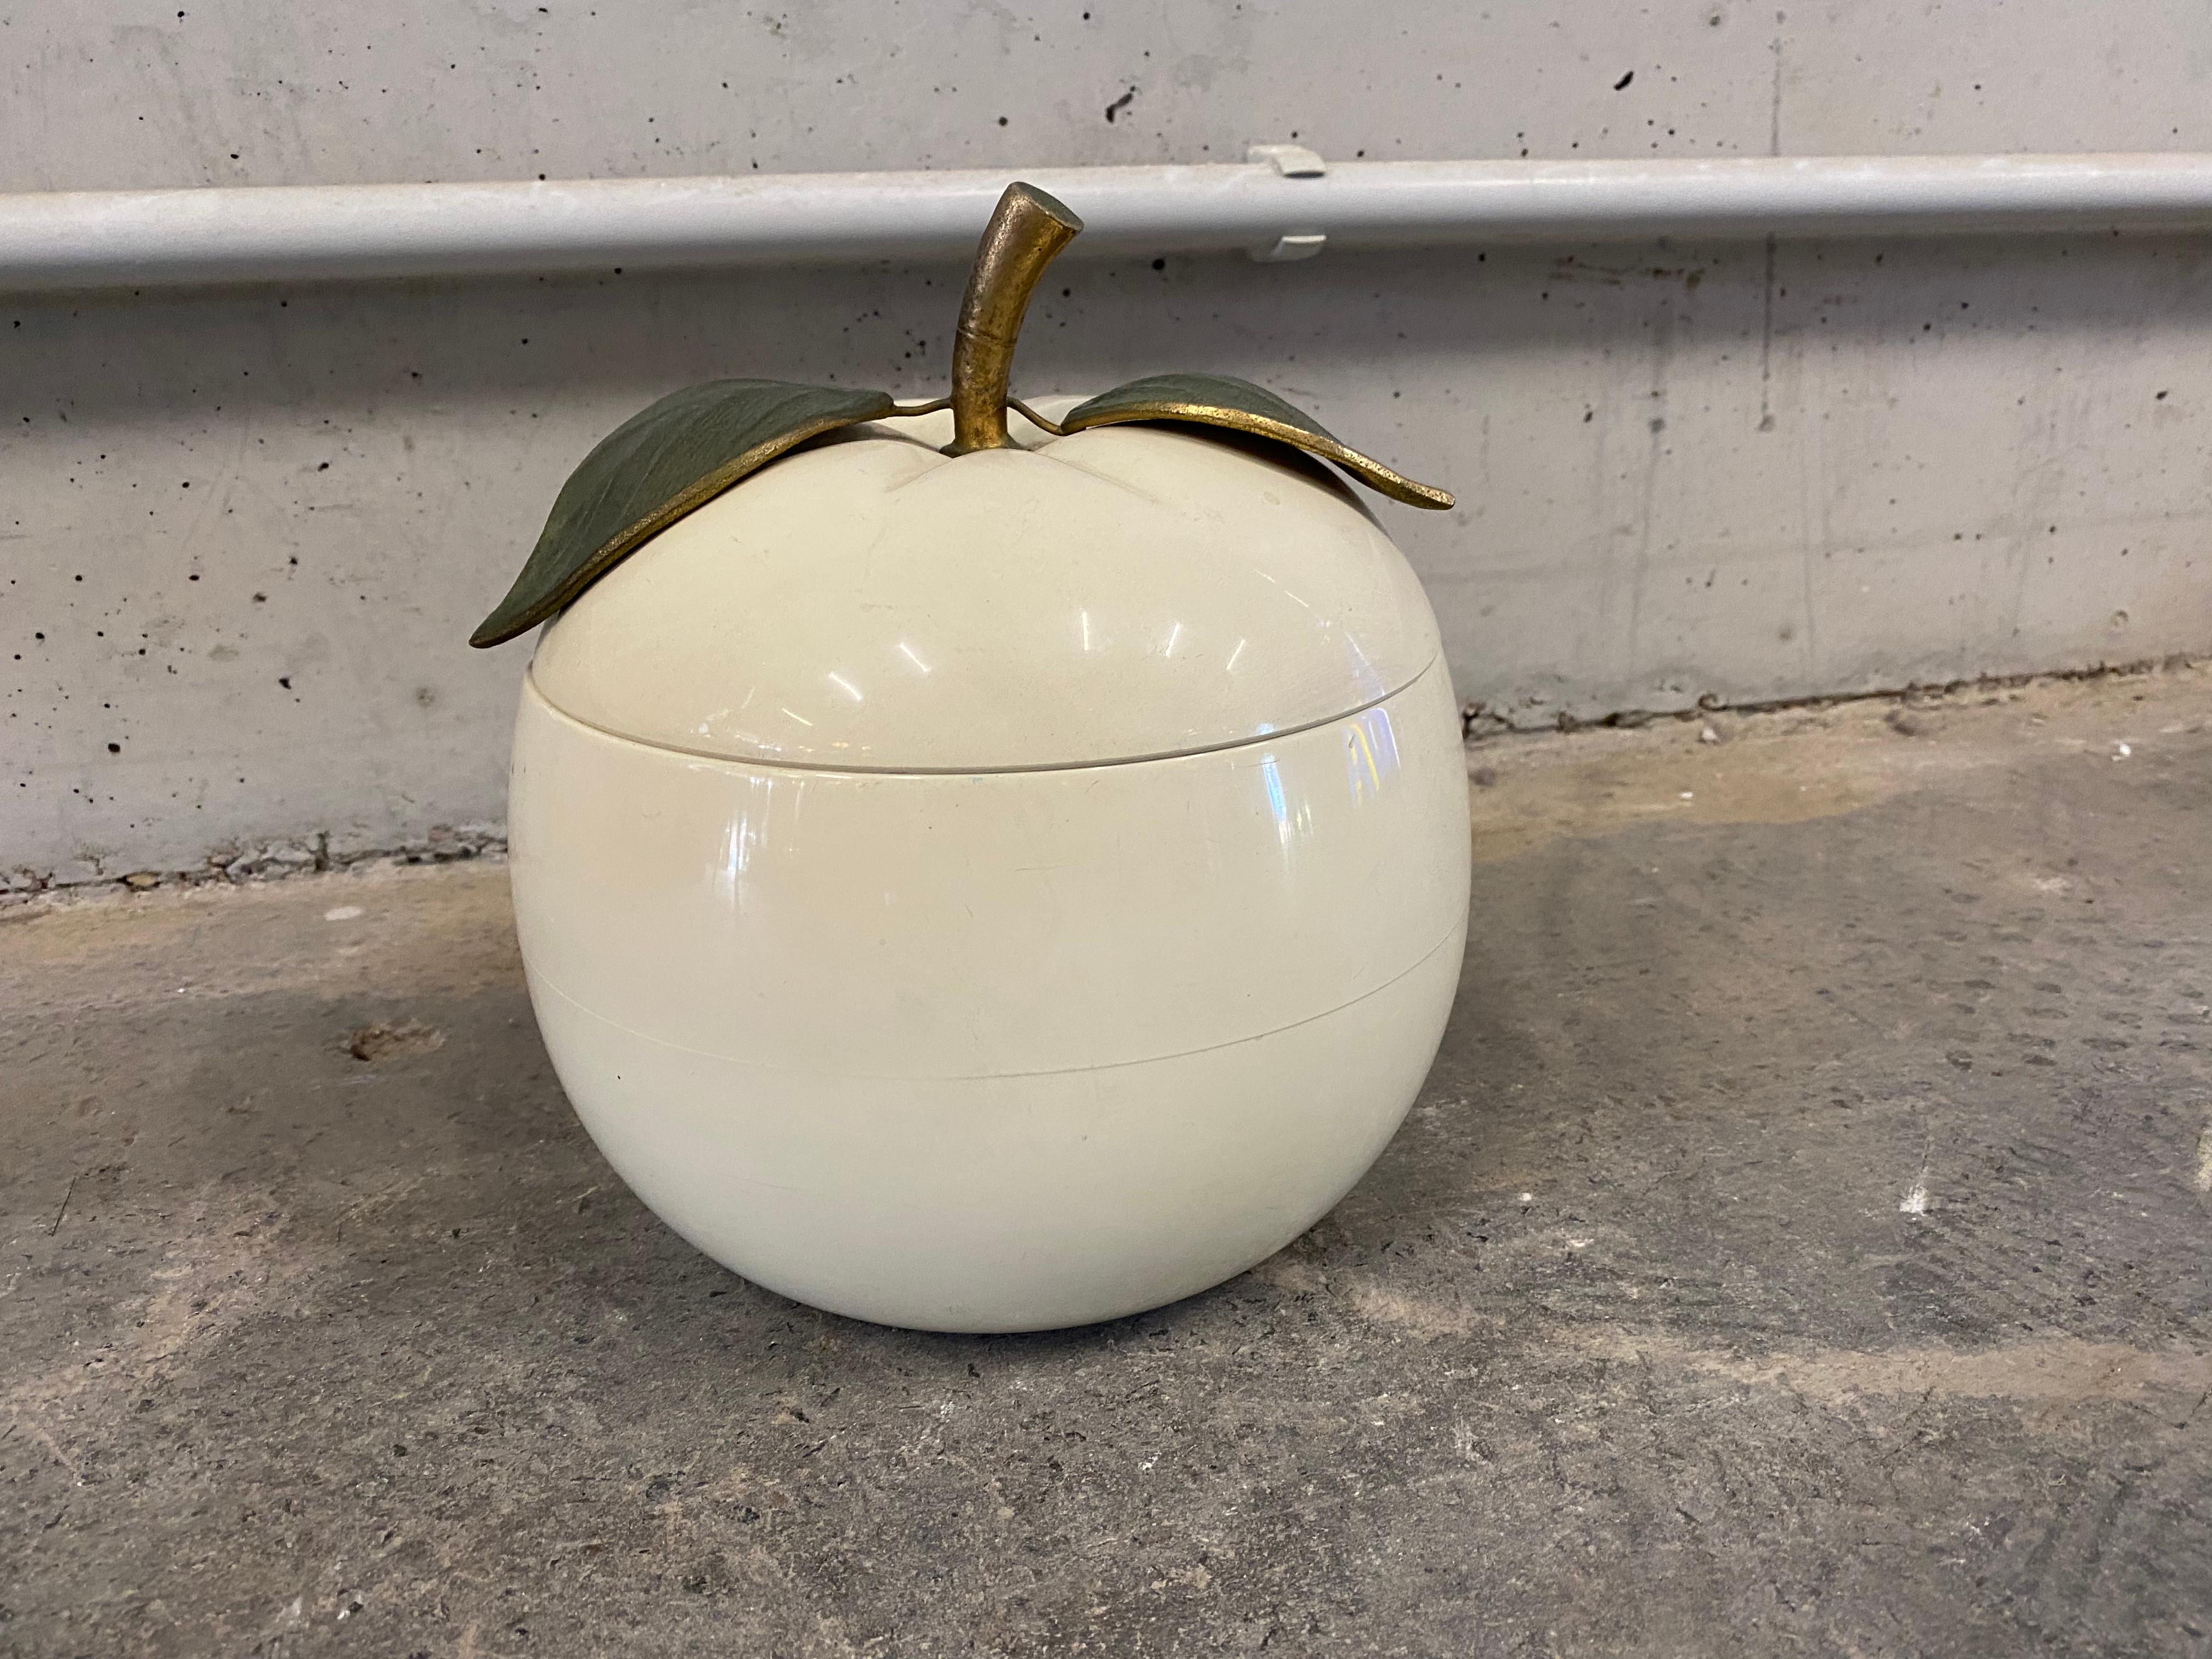 Beautiful creamy white apple ice bucket with gold leaf and stem by Swiss company Freddo Therm from the 1970s. This detailed ice bucket in the shape of an apple is a beautiful, luxurious addition to the home bar or just a special decoration for the